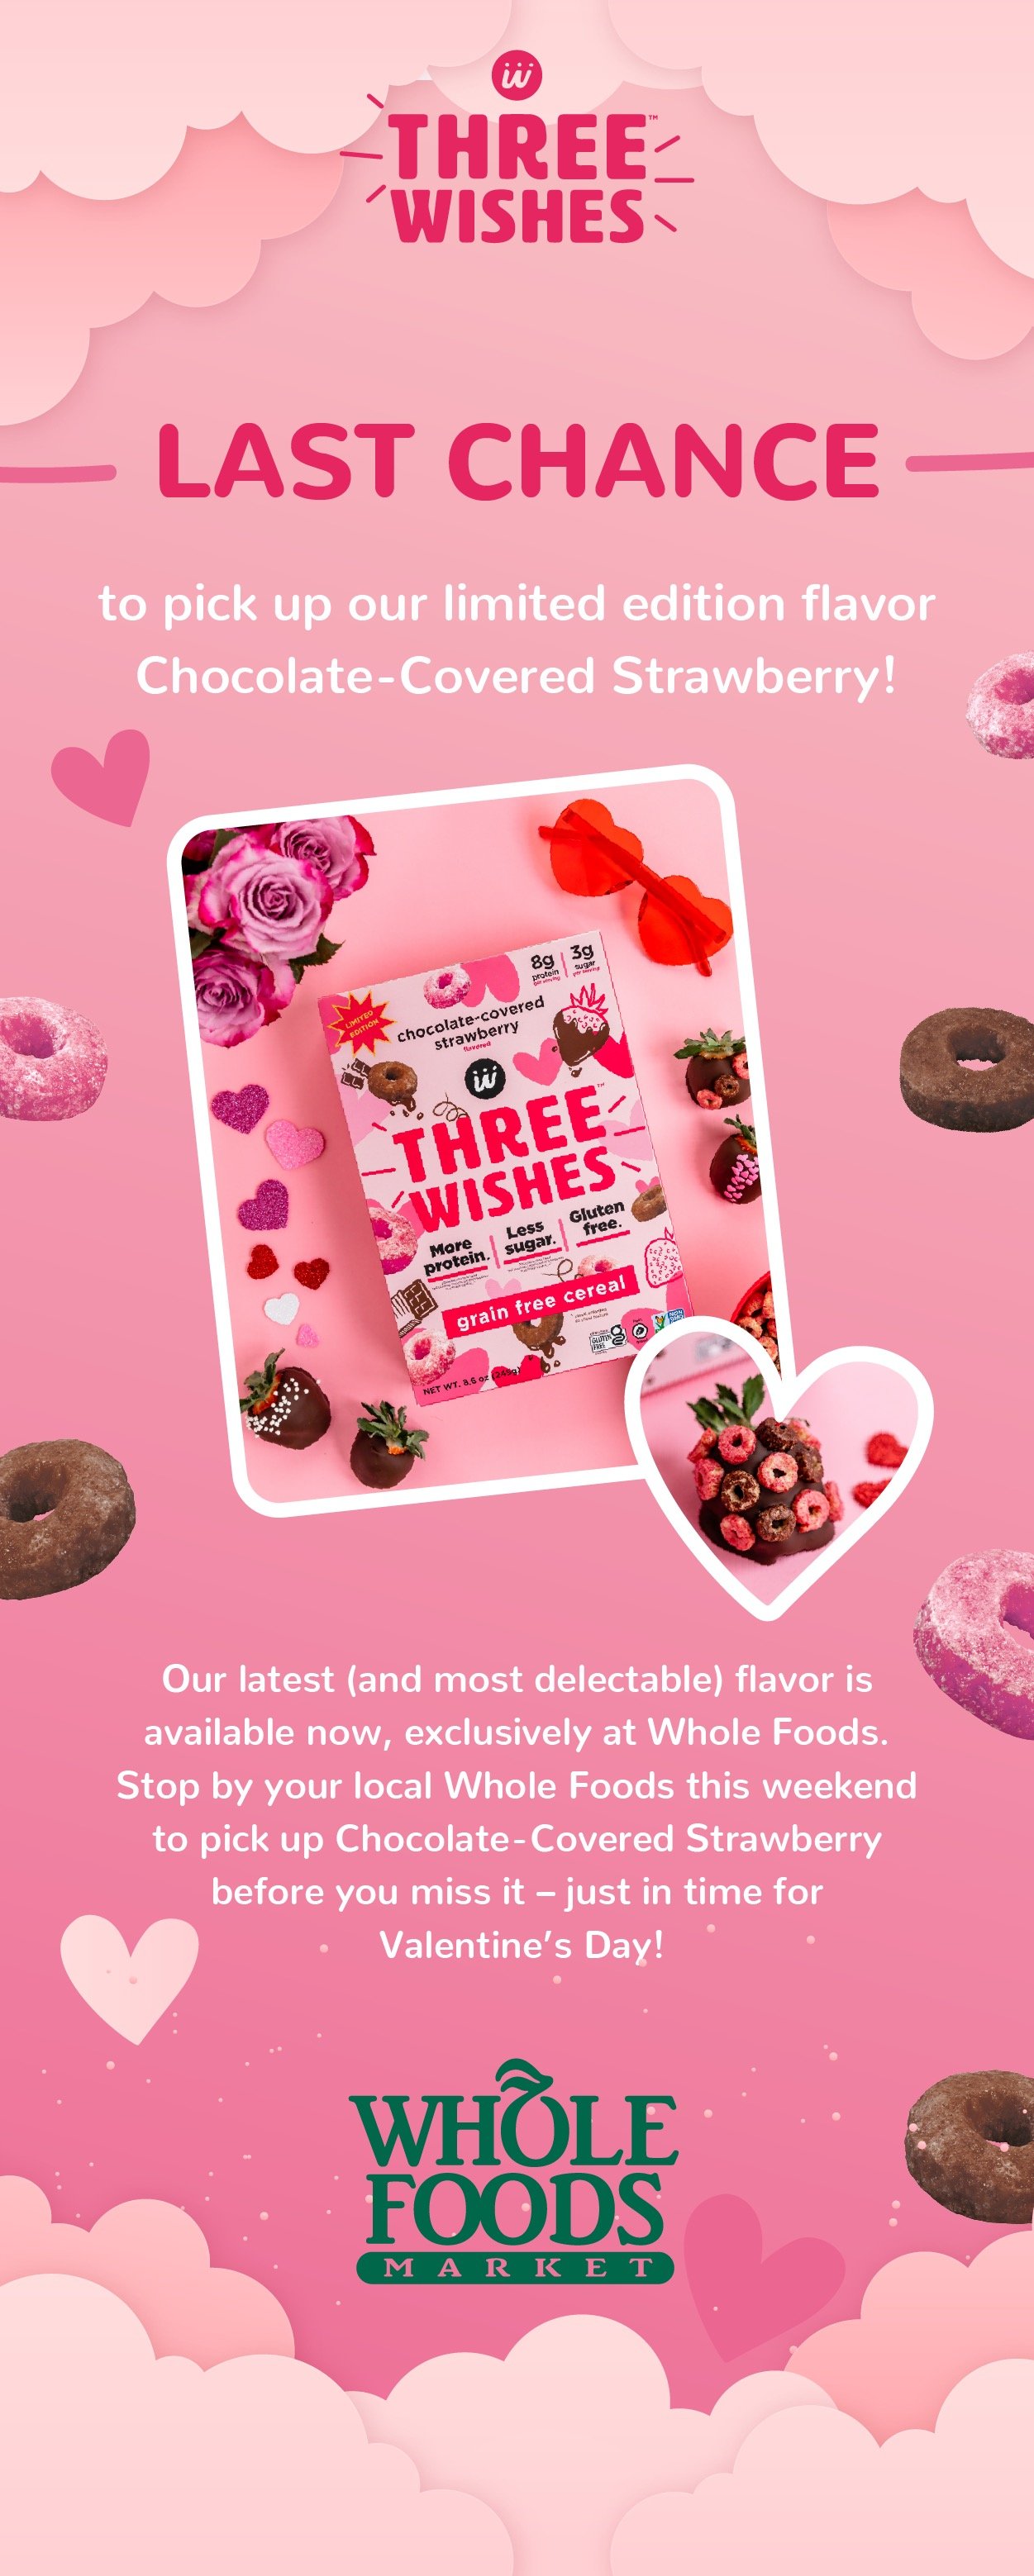 Three Wishes Cereal Strawberry